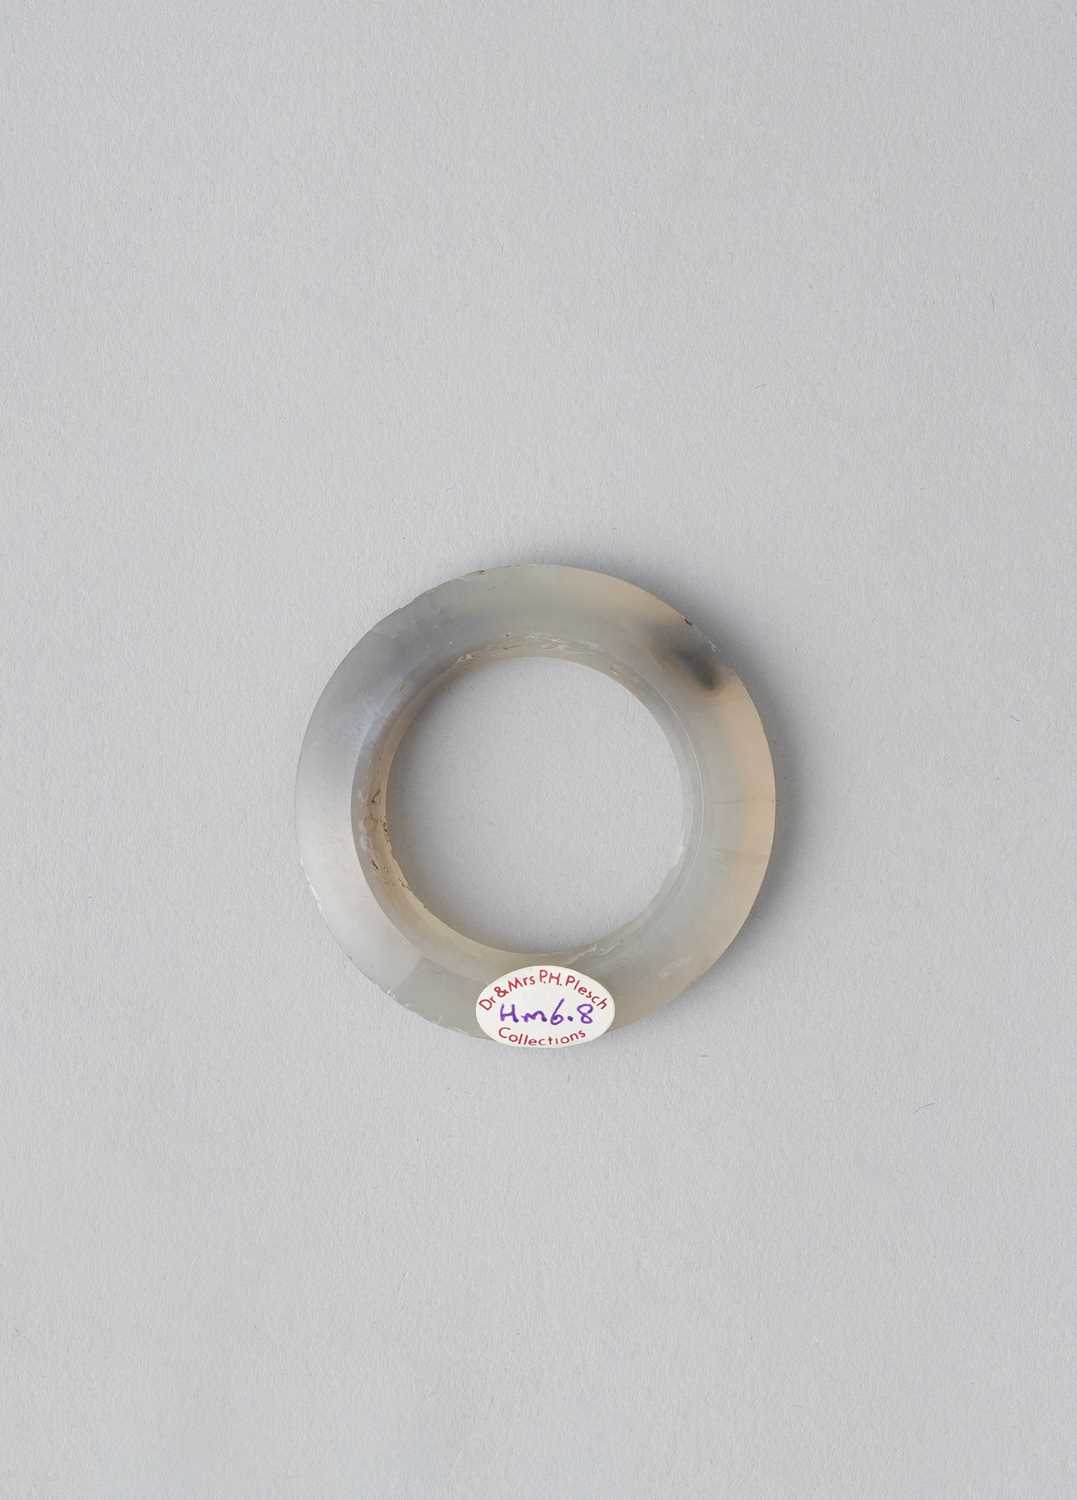 A CHINESE AGATE FACETED RING, HUAN ZHOU DYNASTY Of pale grey colour with darker mottled areas,